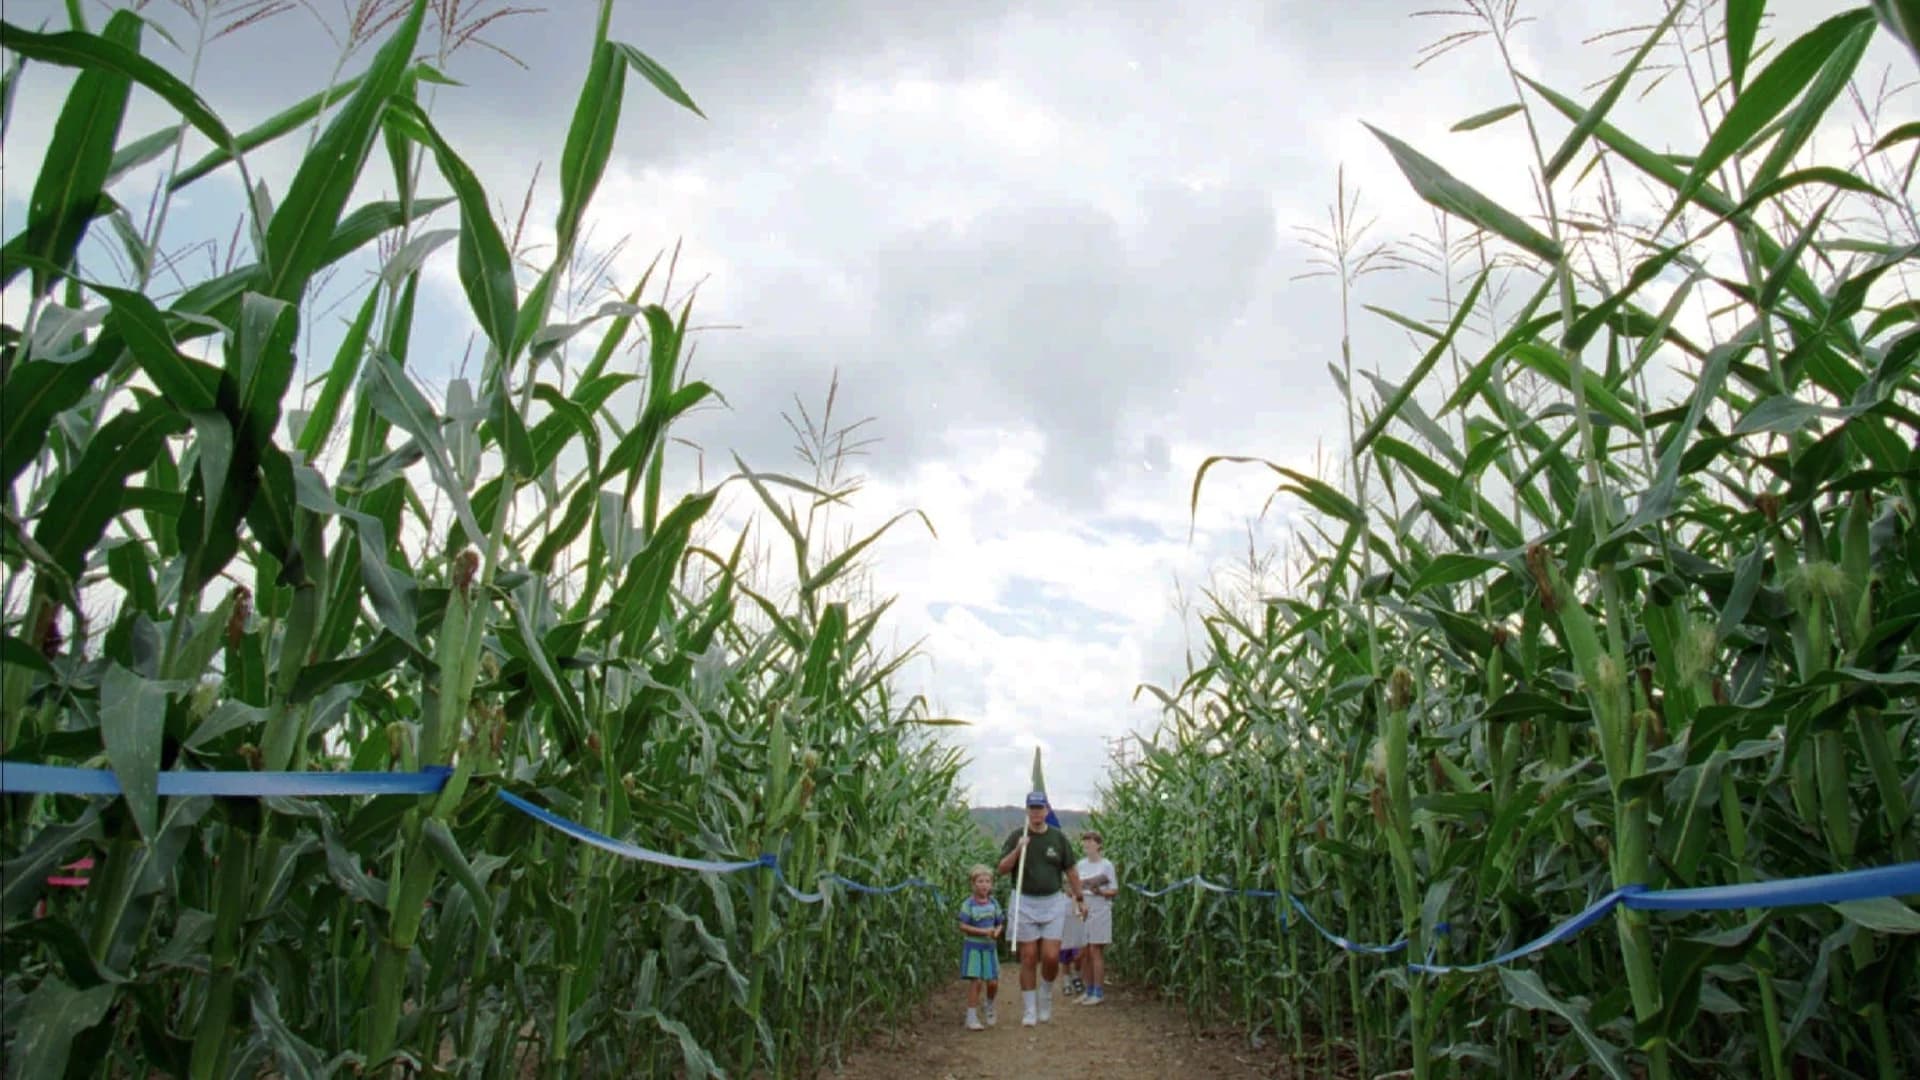 Guide: Get lost in these cornfield mazes around the Hudson Valley